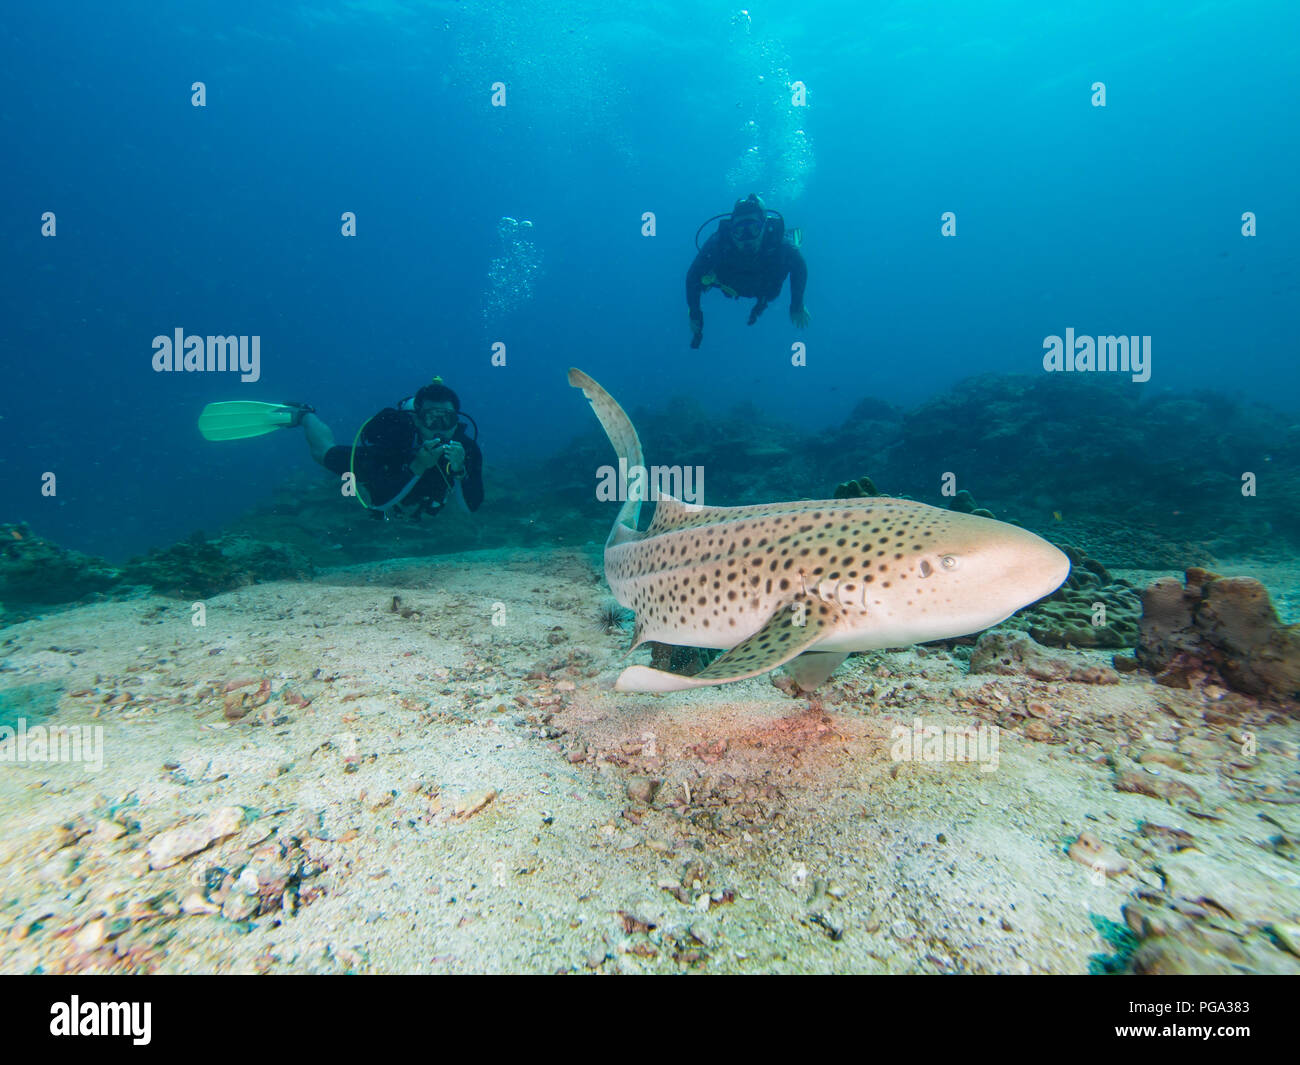 Leopard Shark swimming with two divers behind Stock Photo